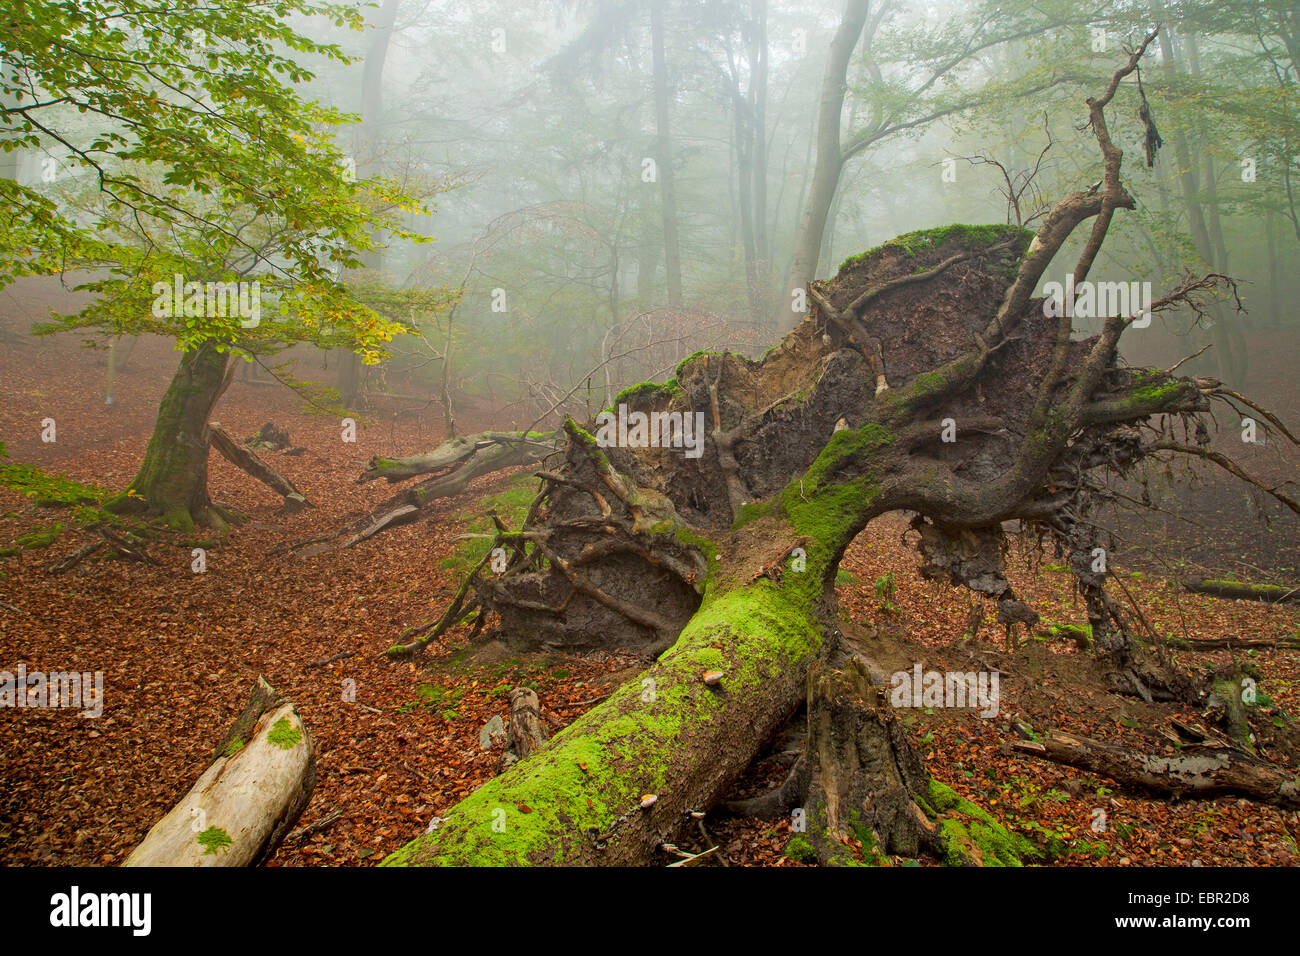 common beech (Fagus sylvatica), uprooted tree, Germany, Hesse, Kellerwald National Park Stock Photo